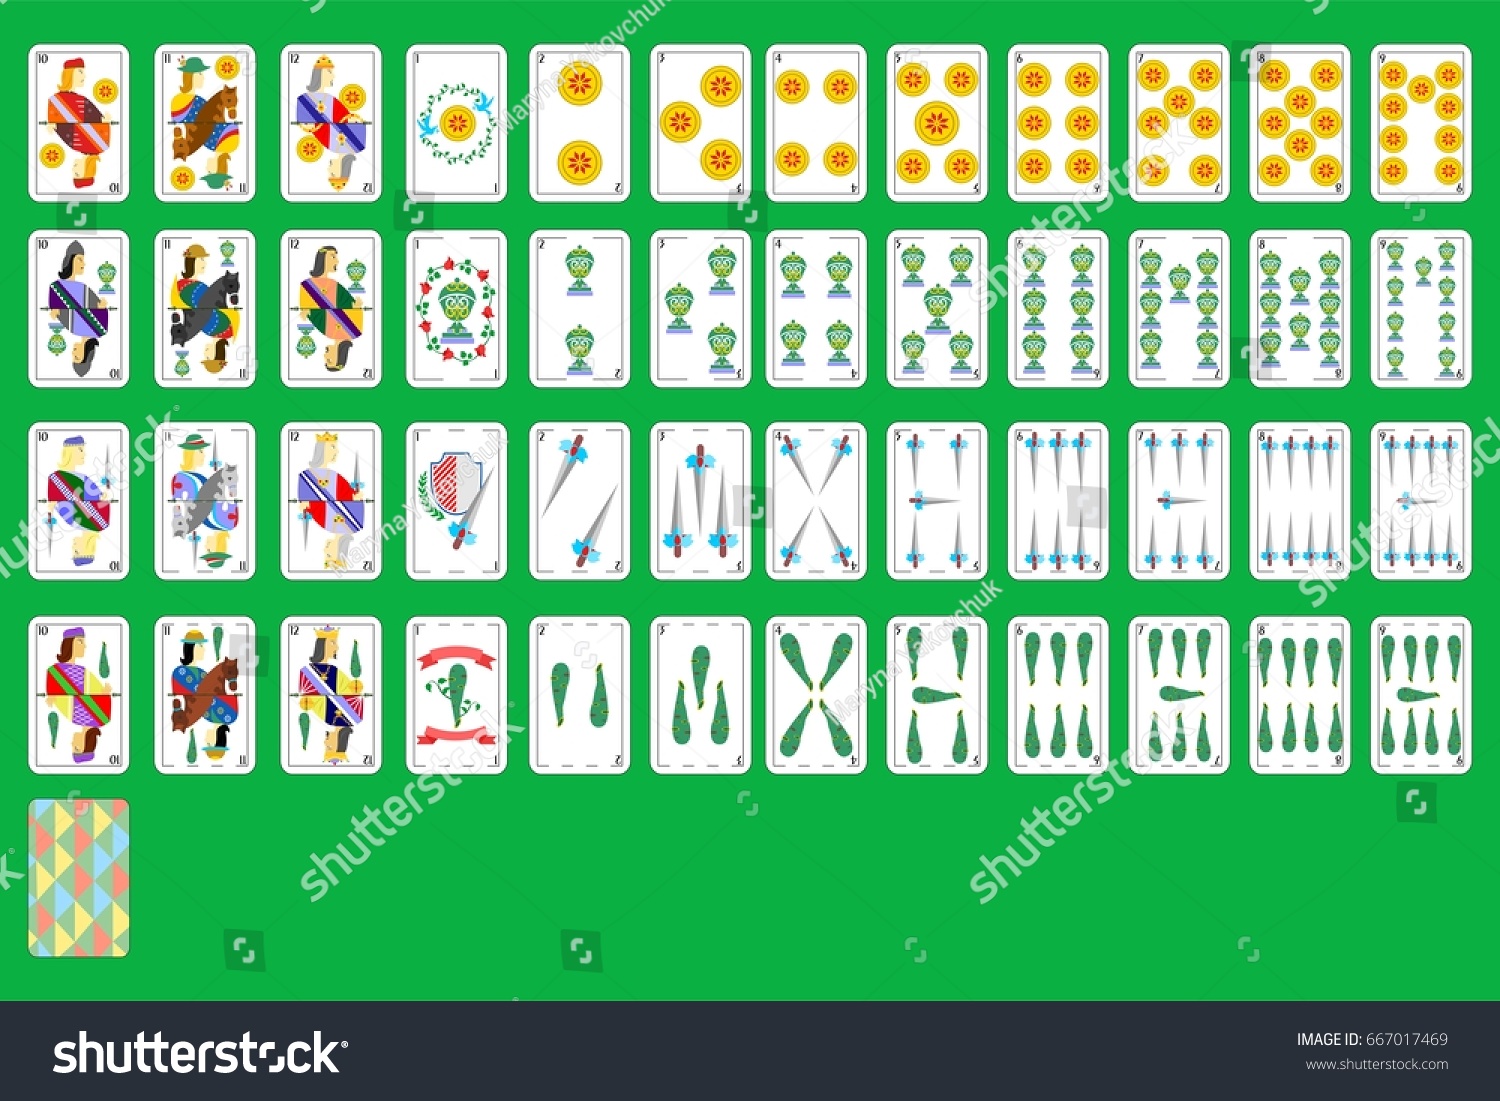 Spanish Playing Cards Instruction Book